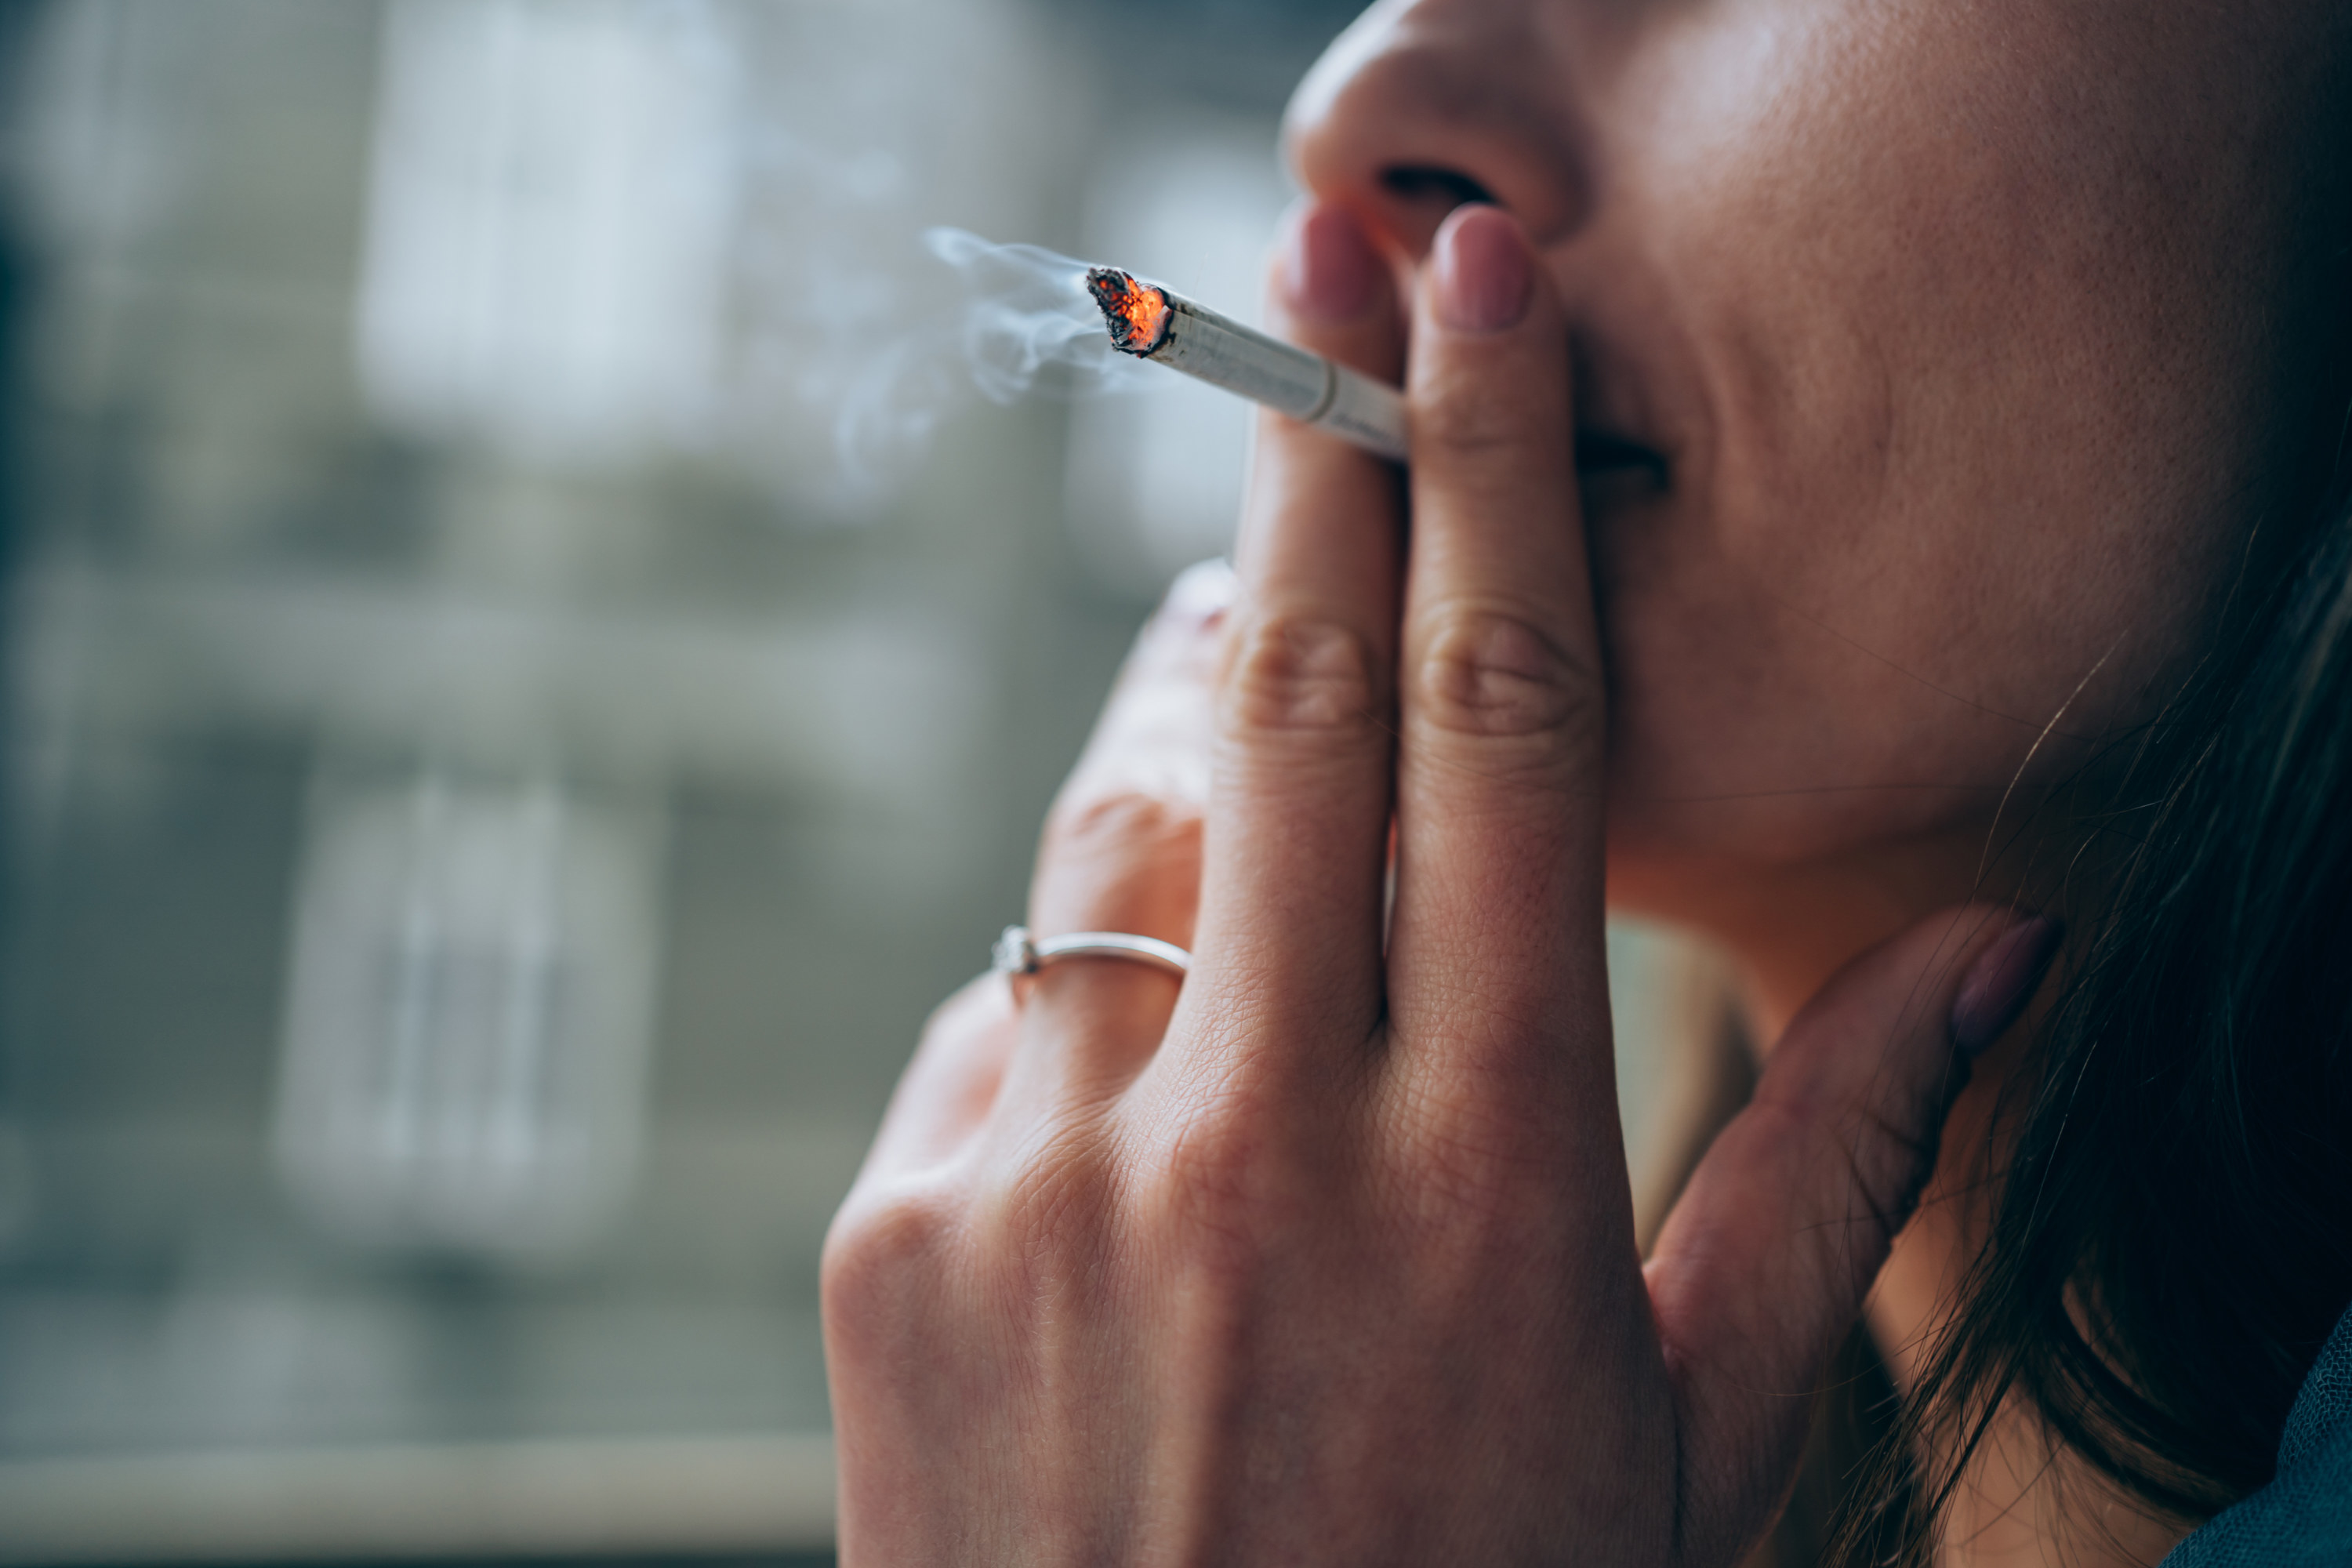 An up-close shot of a person holding a cigarette up to their mouth